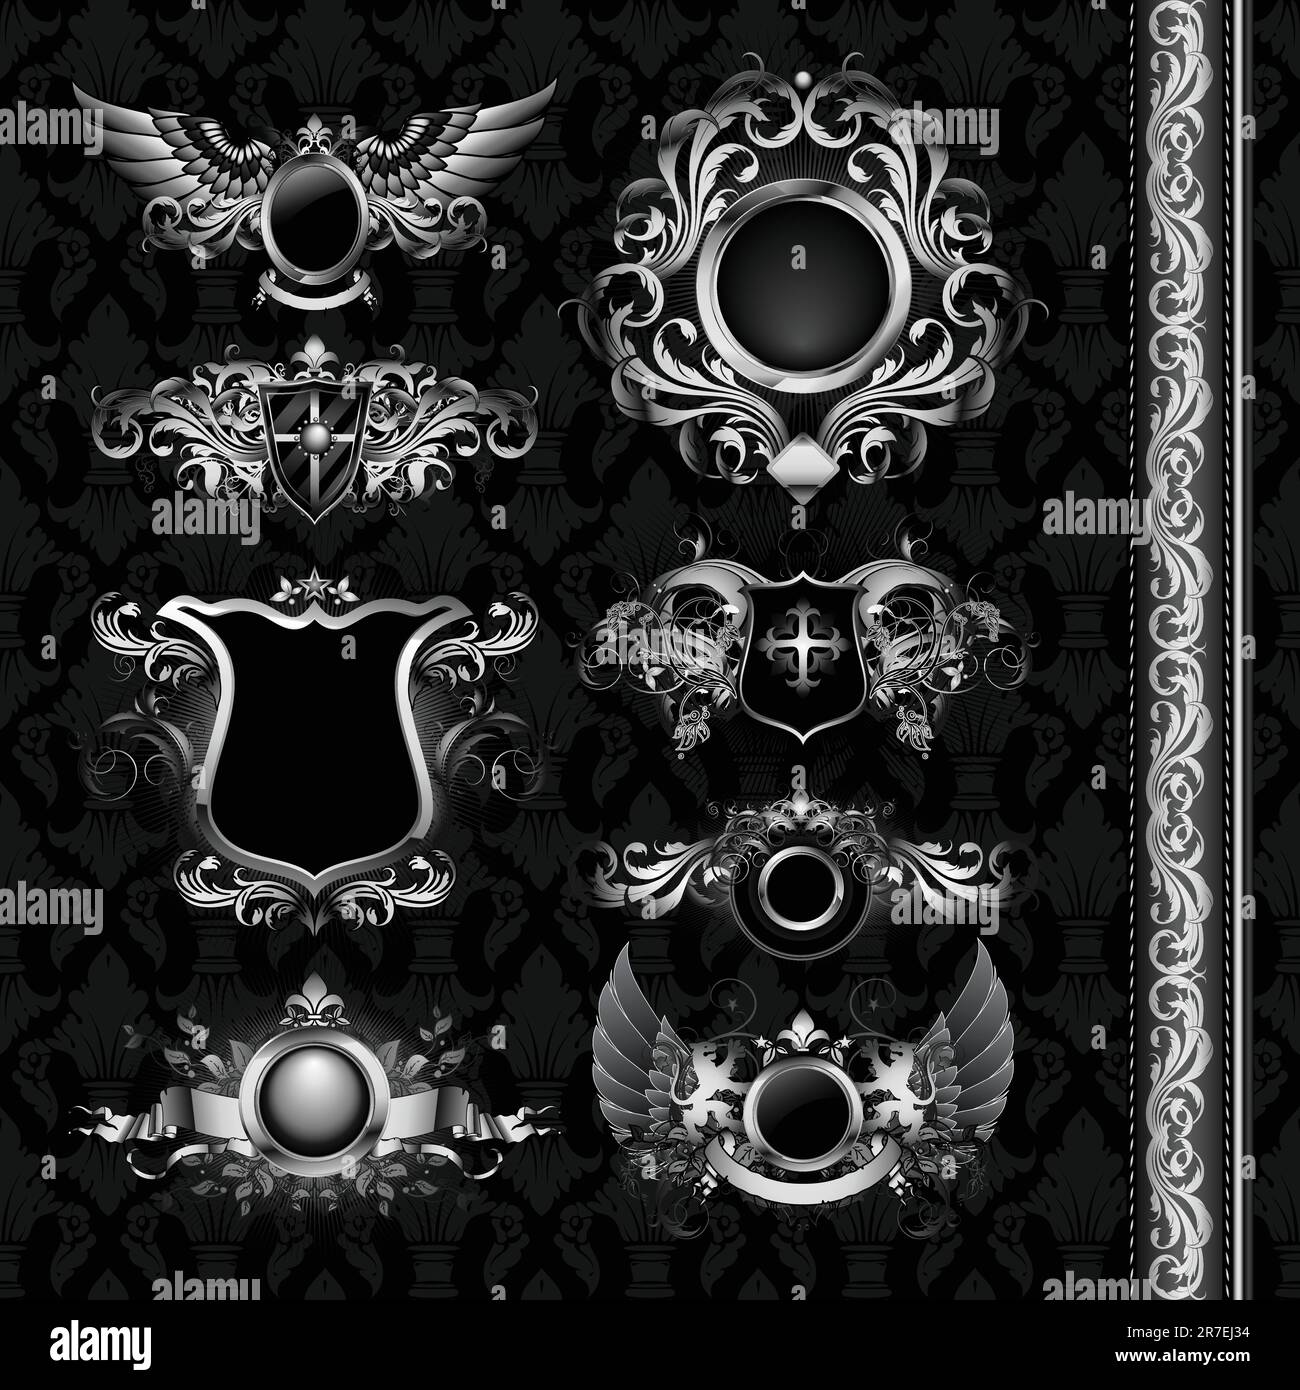 medieval heraldry shields, this illustration may be useful as designer work Stock Vector